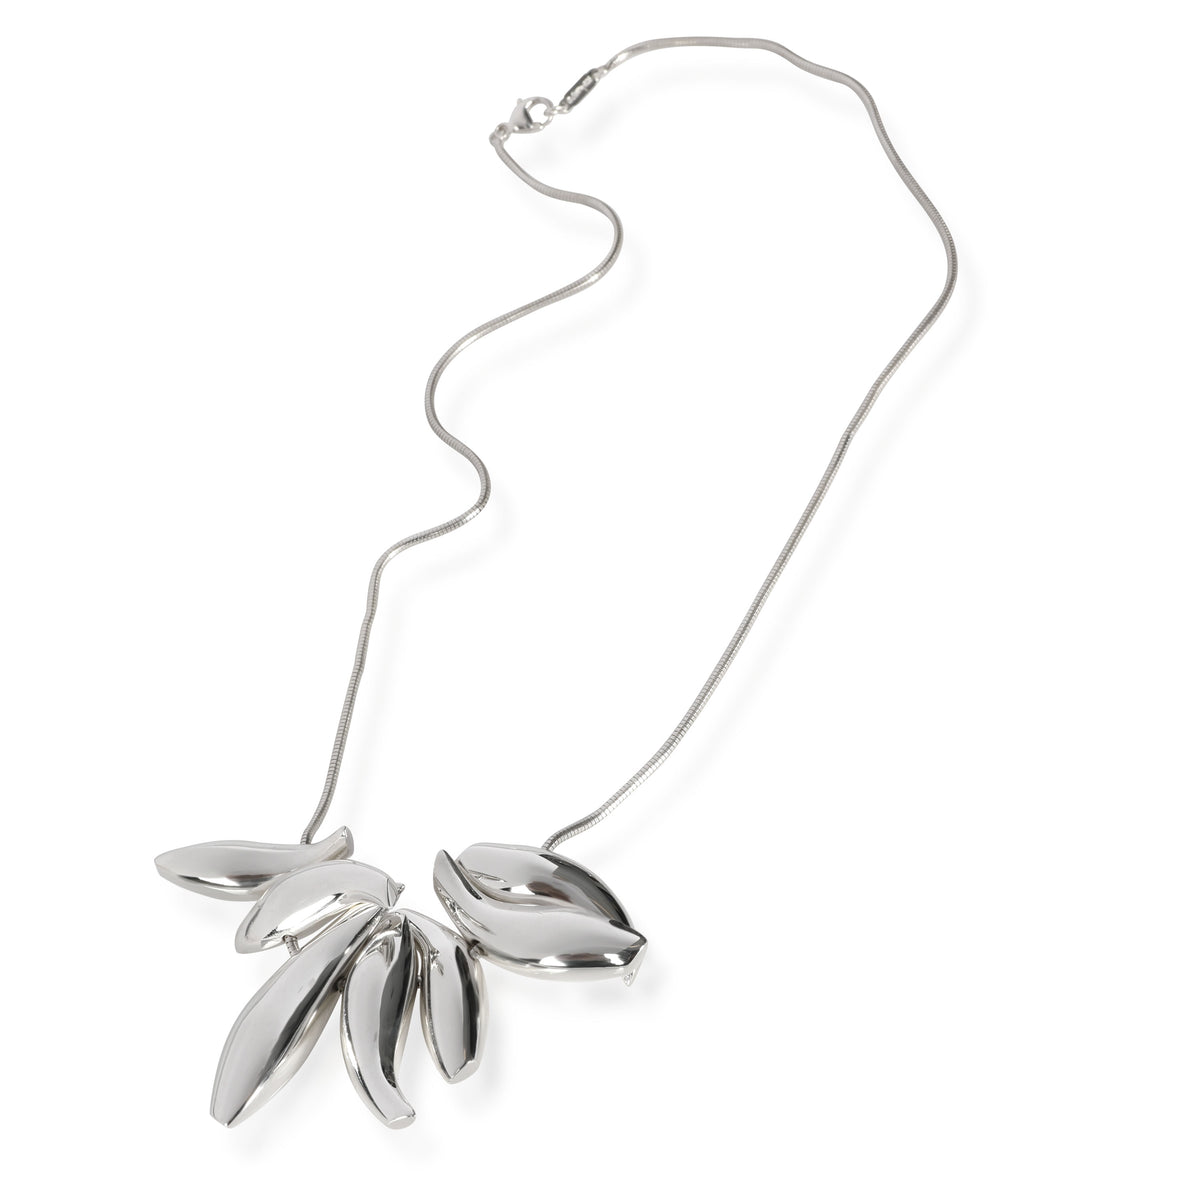 Tiffany & Co. Frank Gehry Seven Fish Necklace in  Sterling Silver